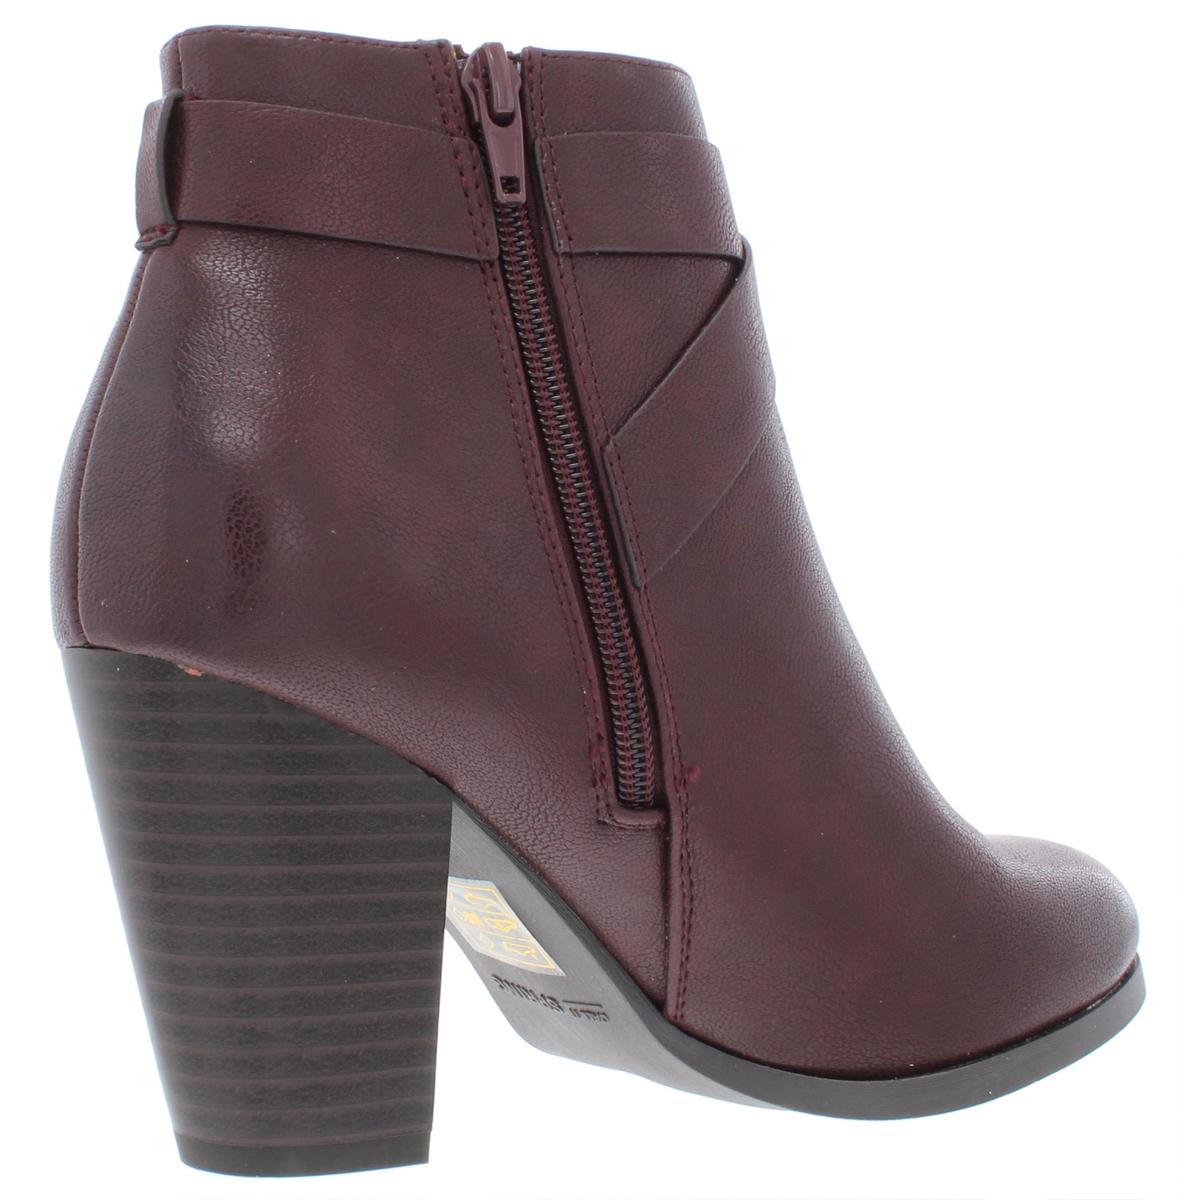 call it spring tecia booties